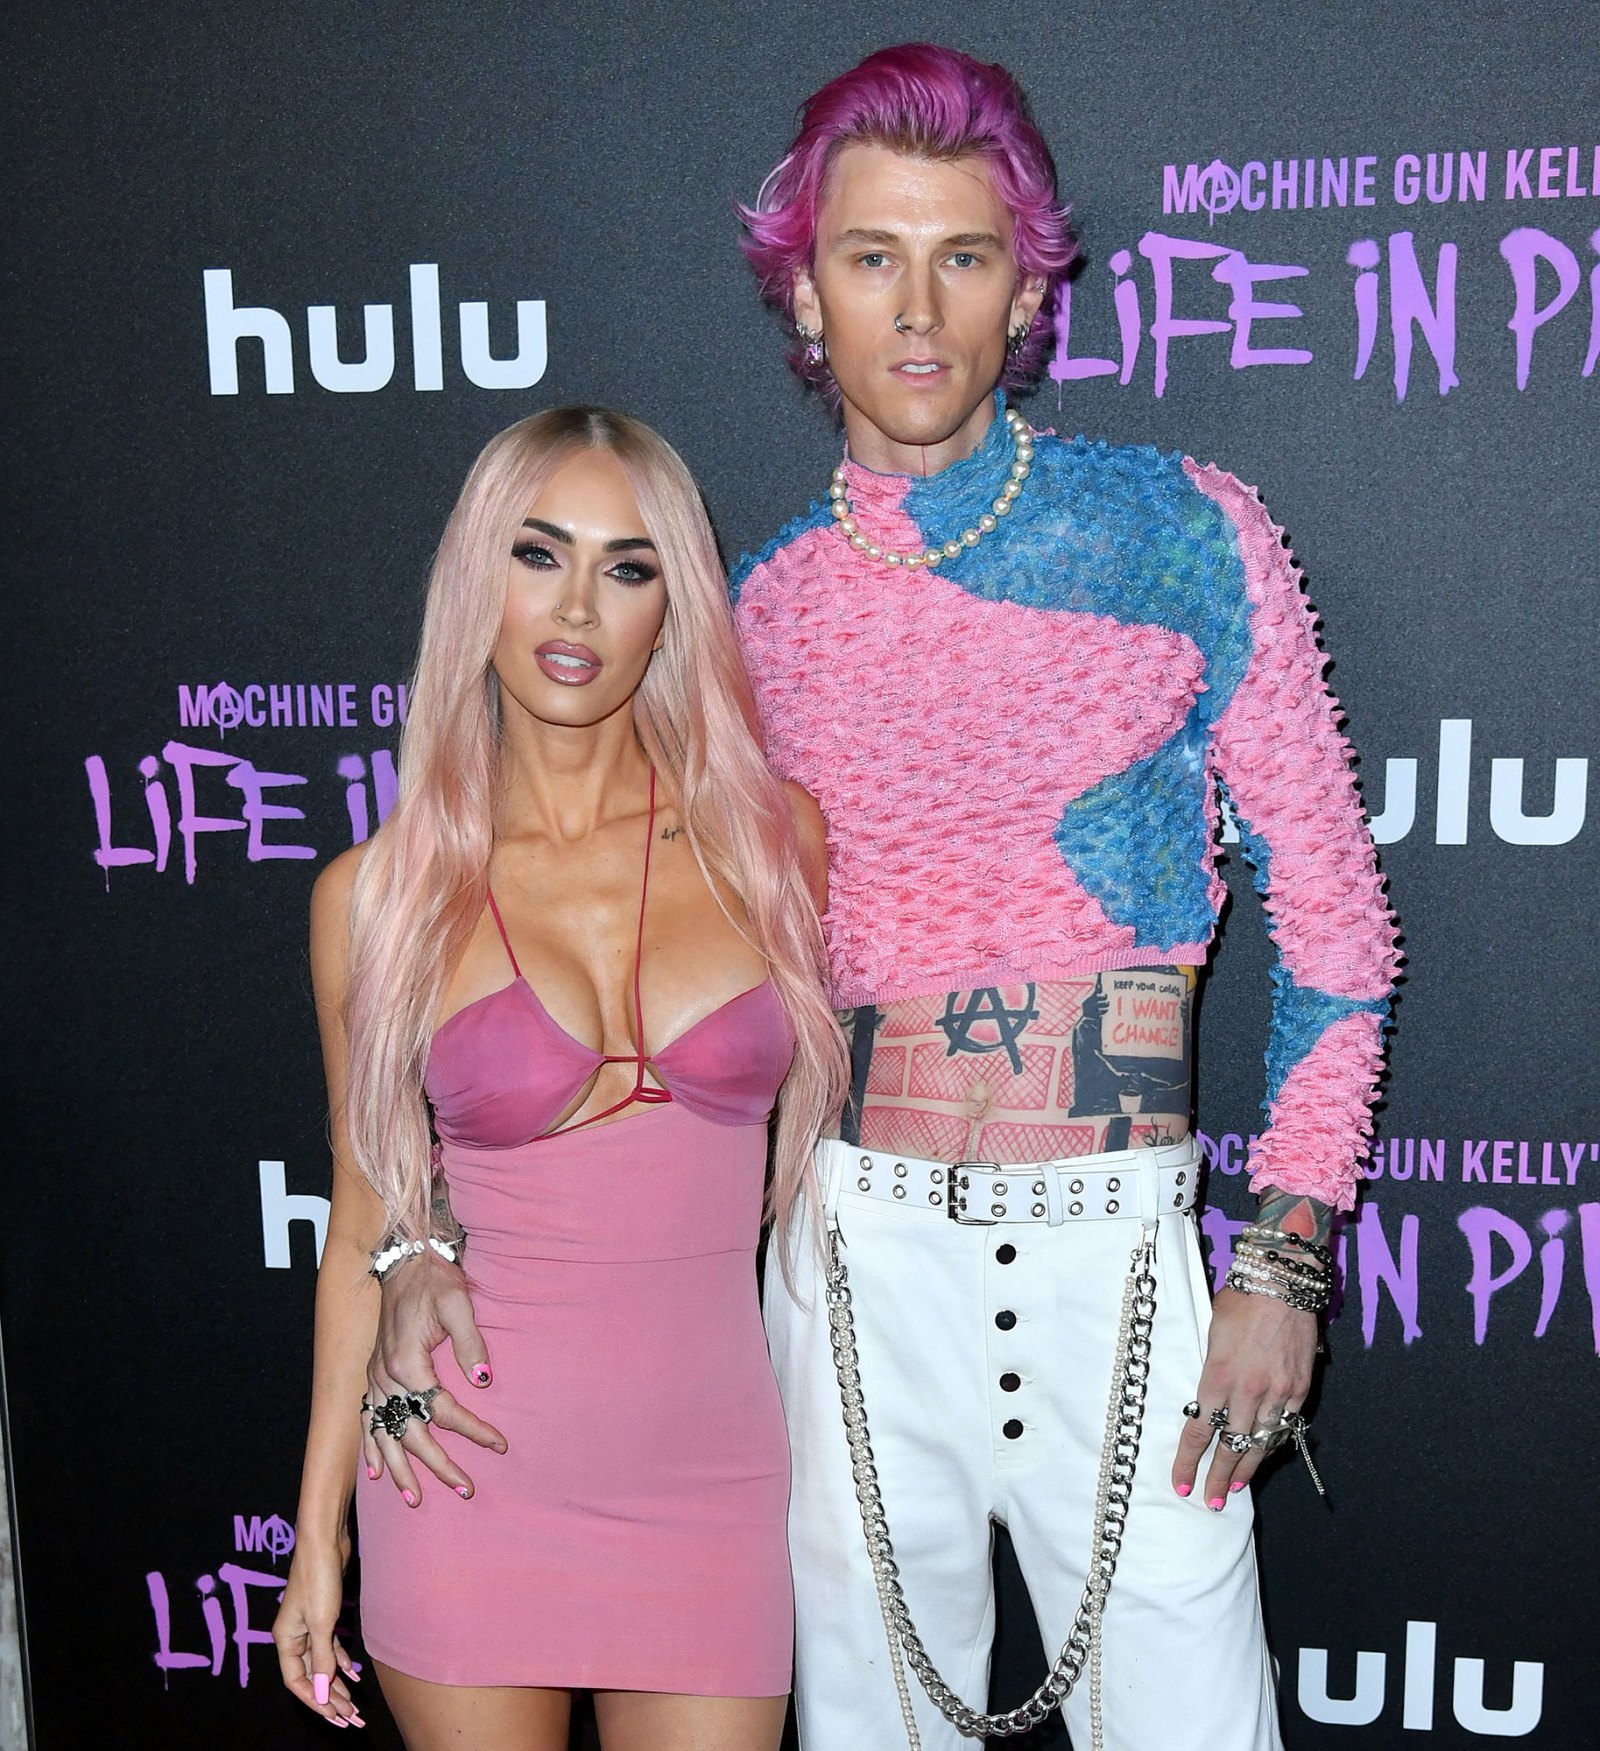 Megan Fox Goes Blonde with Pink Highlights for MGKs Life in Pink Premiere